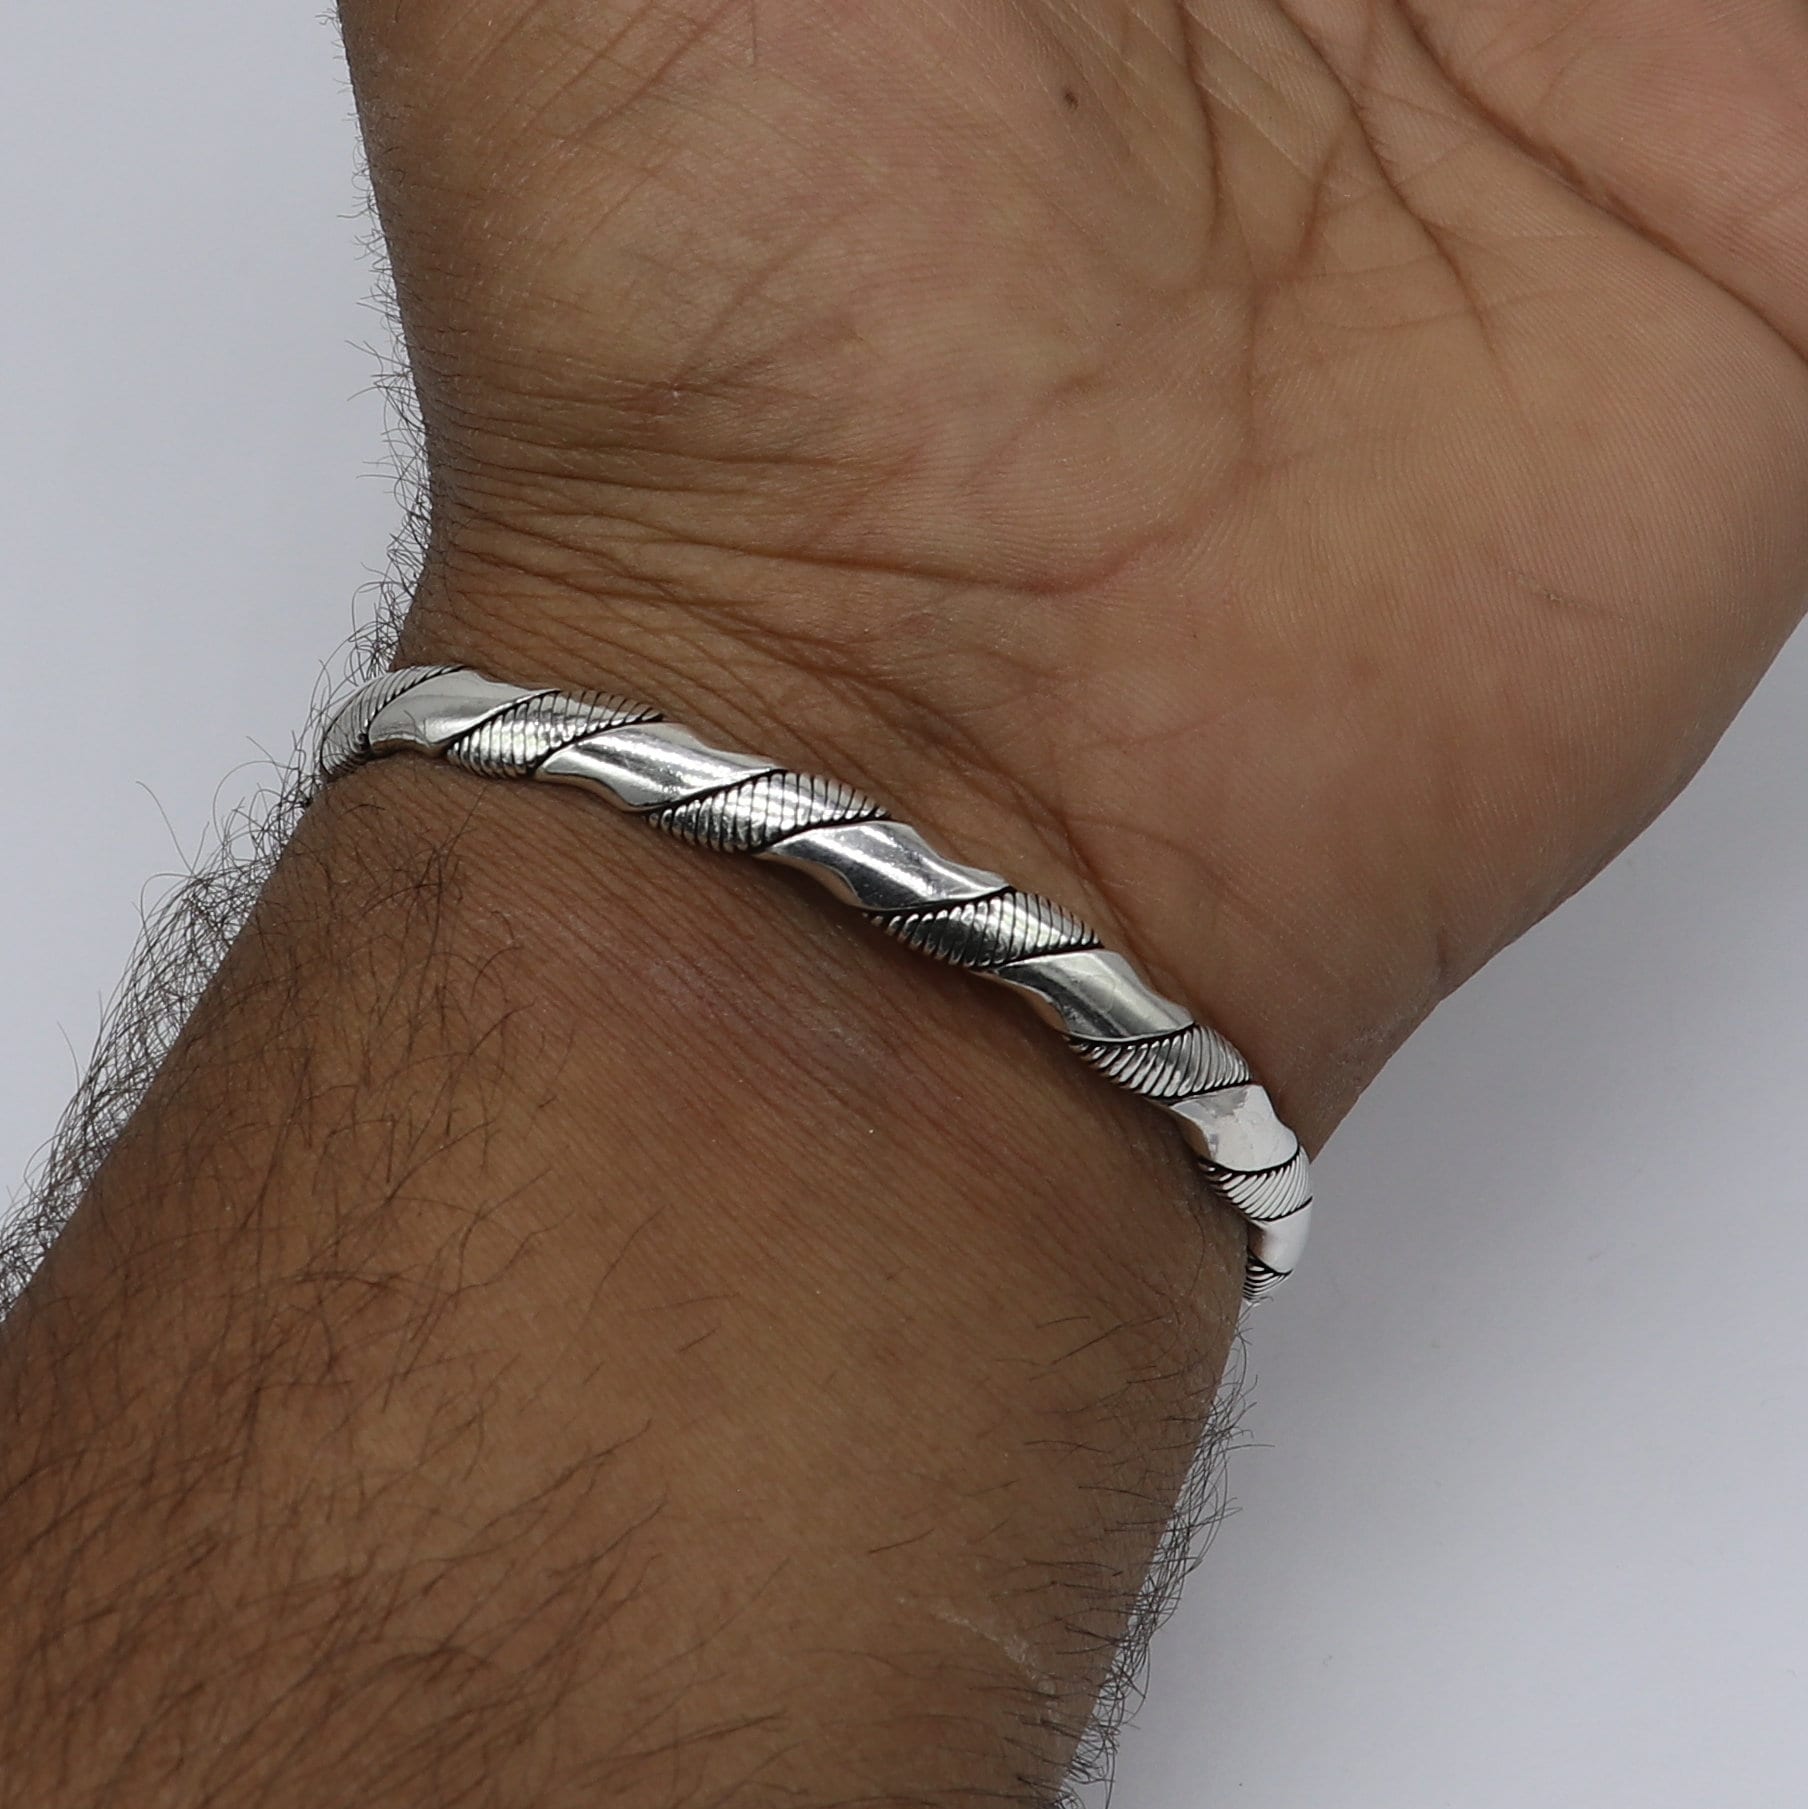 Plain shiny solid 925 sterling silver handmade adjustable cuff bangle bracelet unsex gifting jewelry CUFF223 - TRIBAL ORNAMENTS